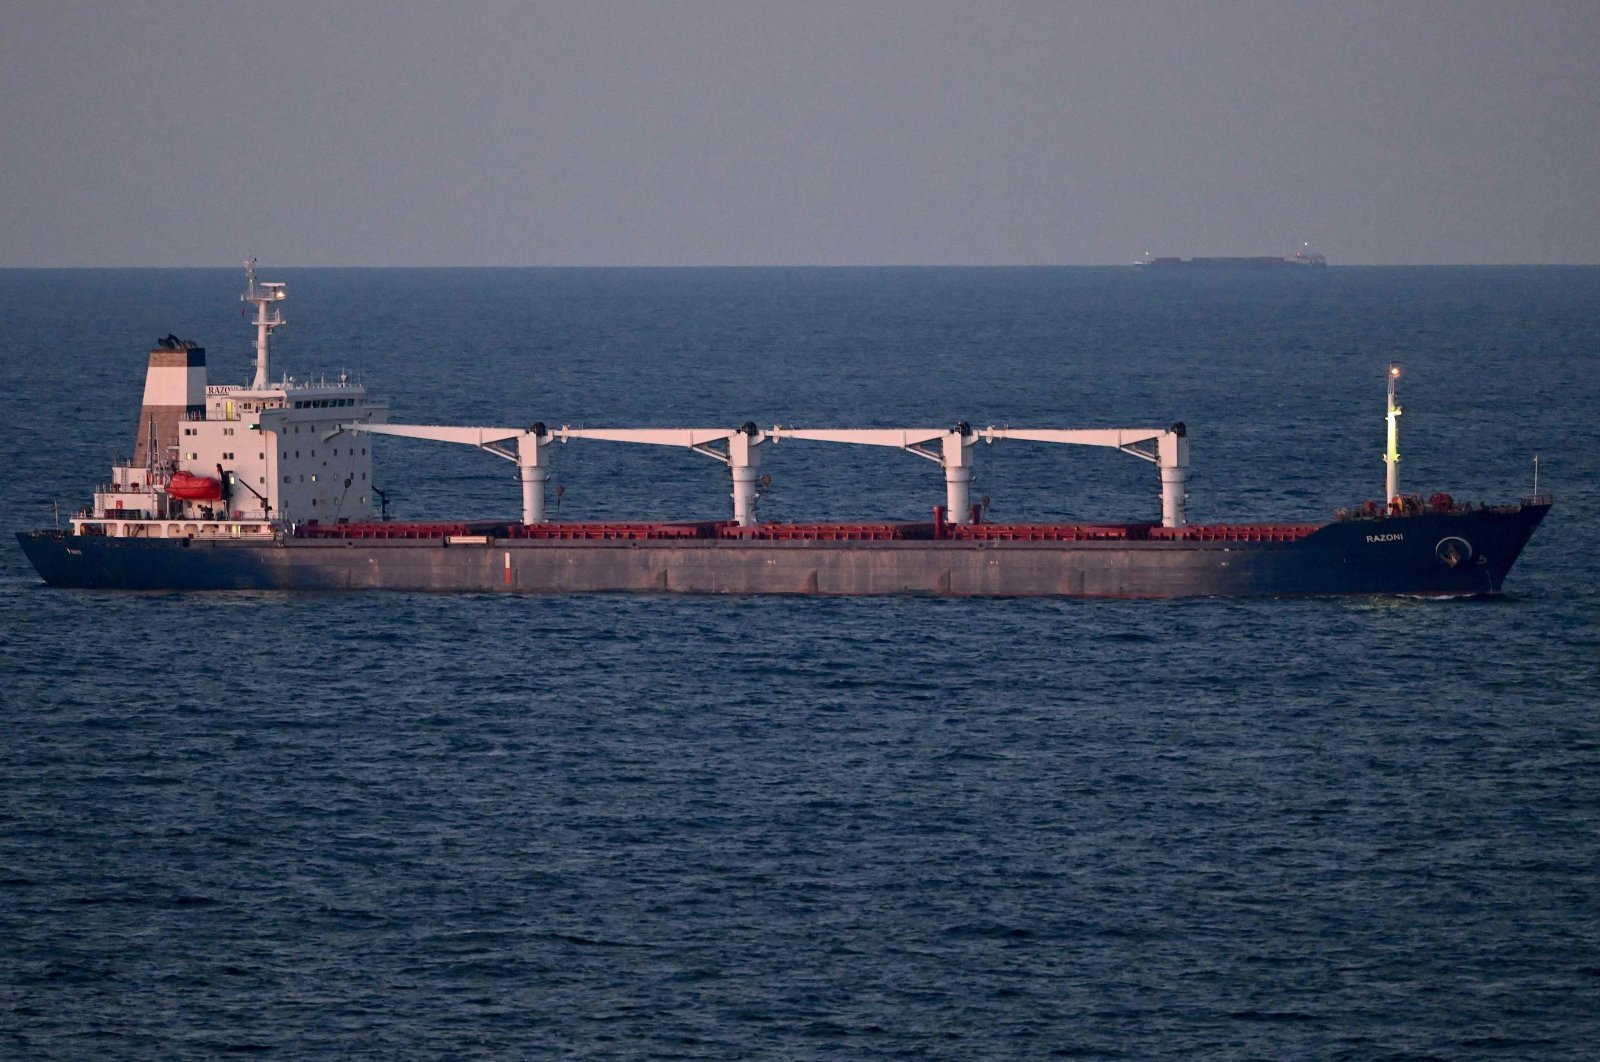 The Sierra Leone-flagged cargo ship Razoni carrying 26,000 tonnes of corn seen off shore northwest of Istanbul, Turkey, Aug. 2, 2022. (AFP Photo)